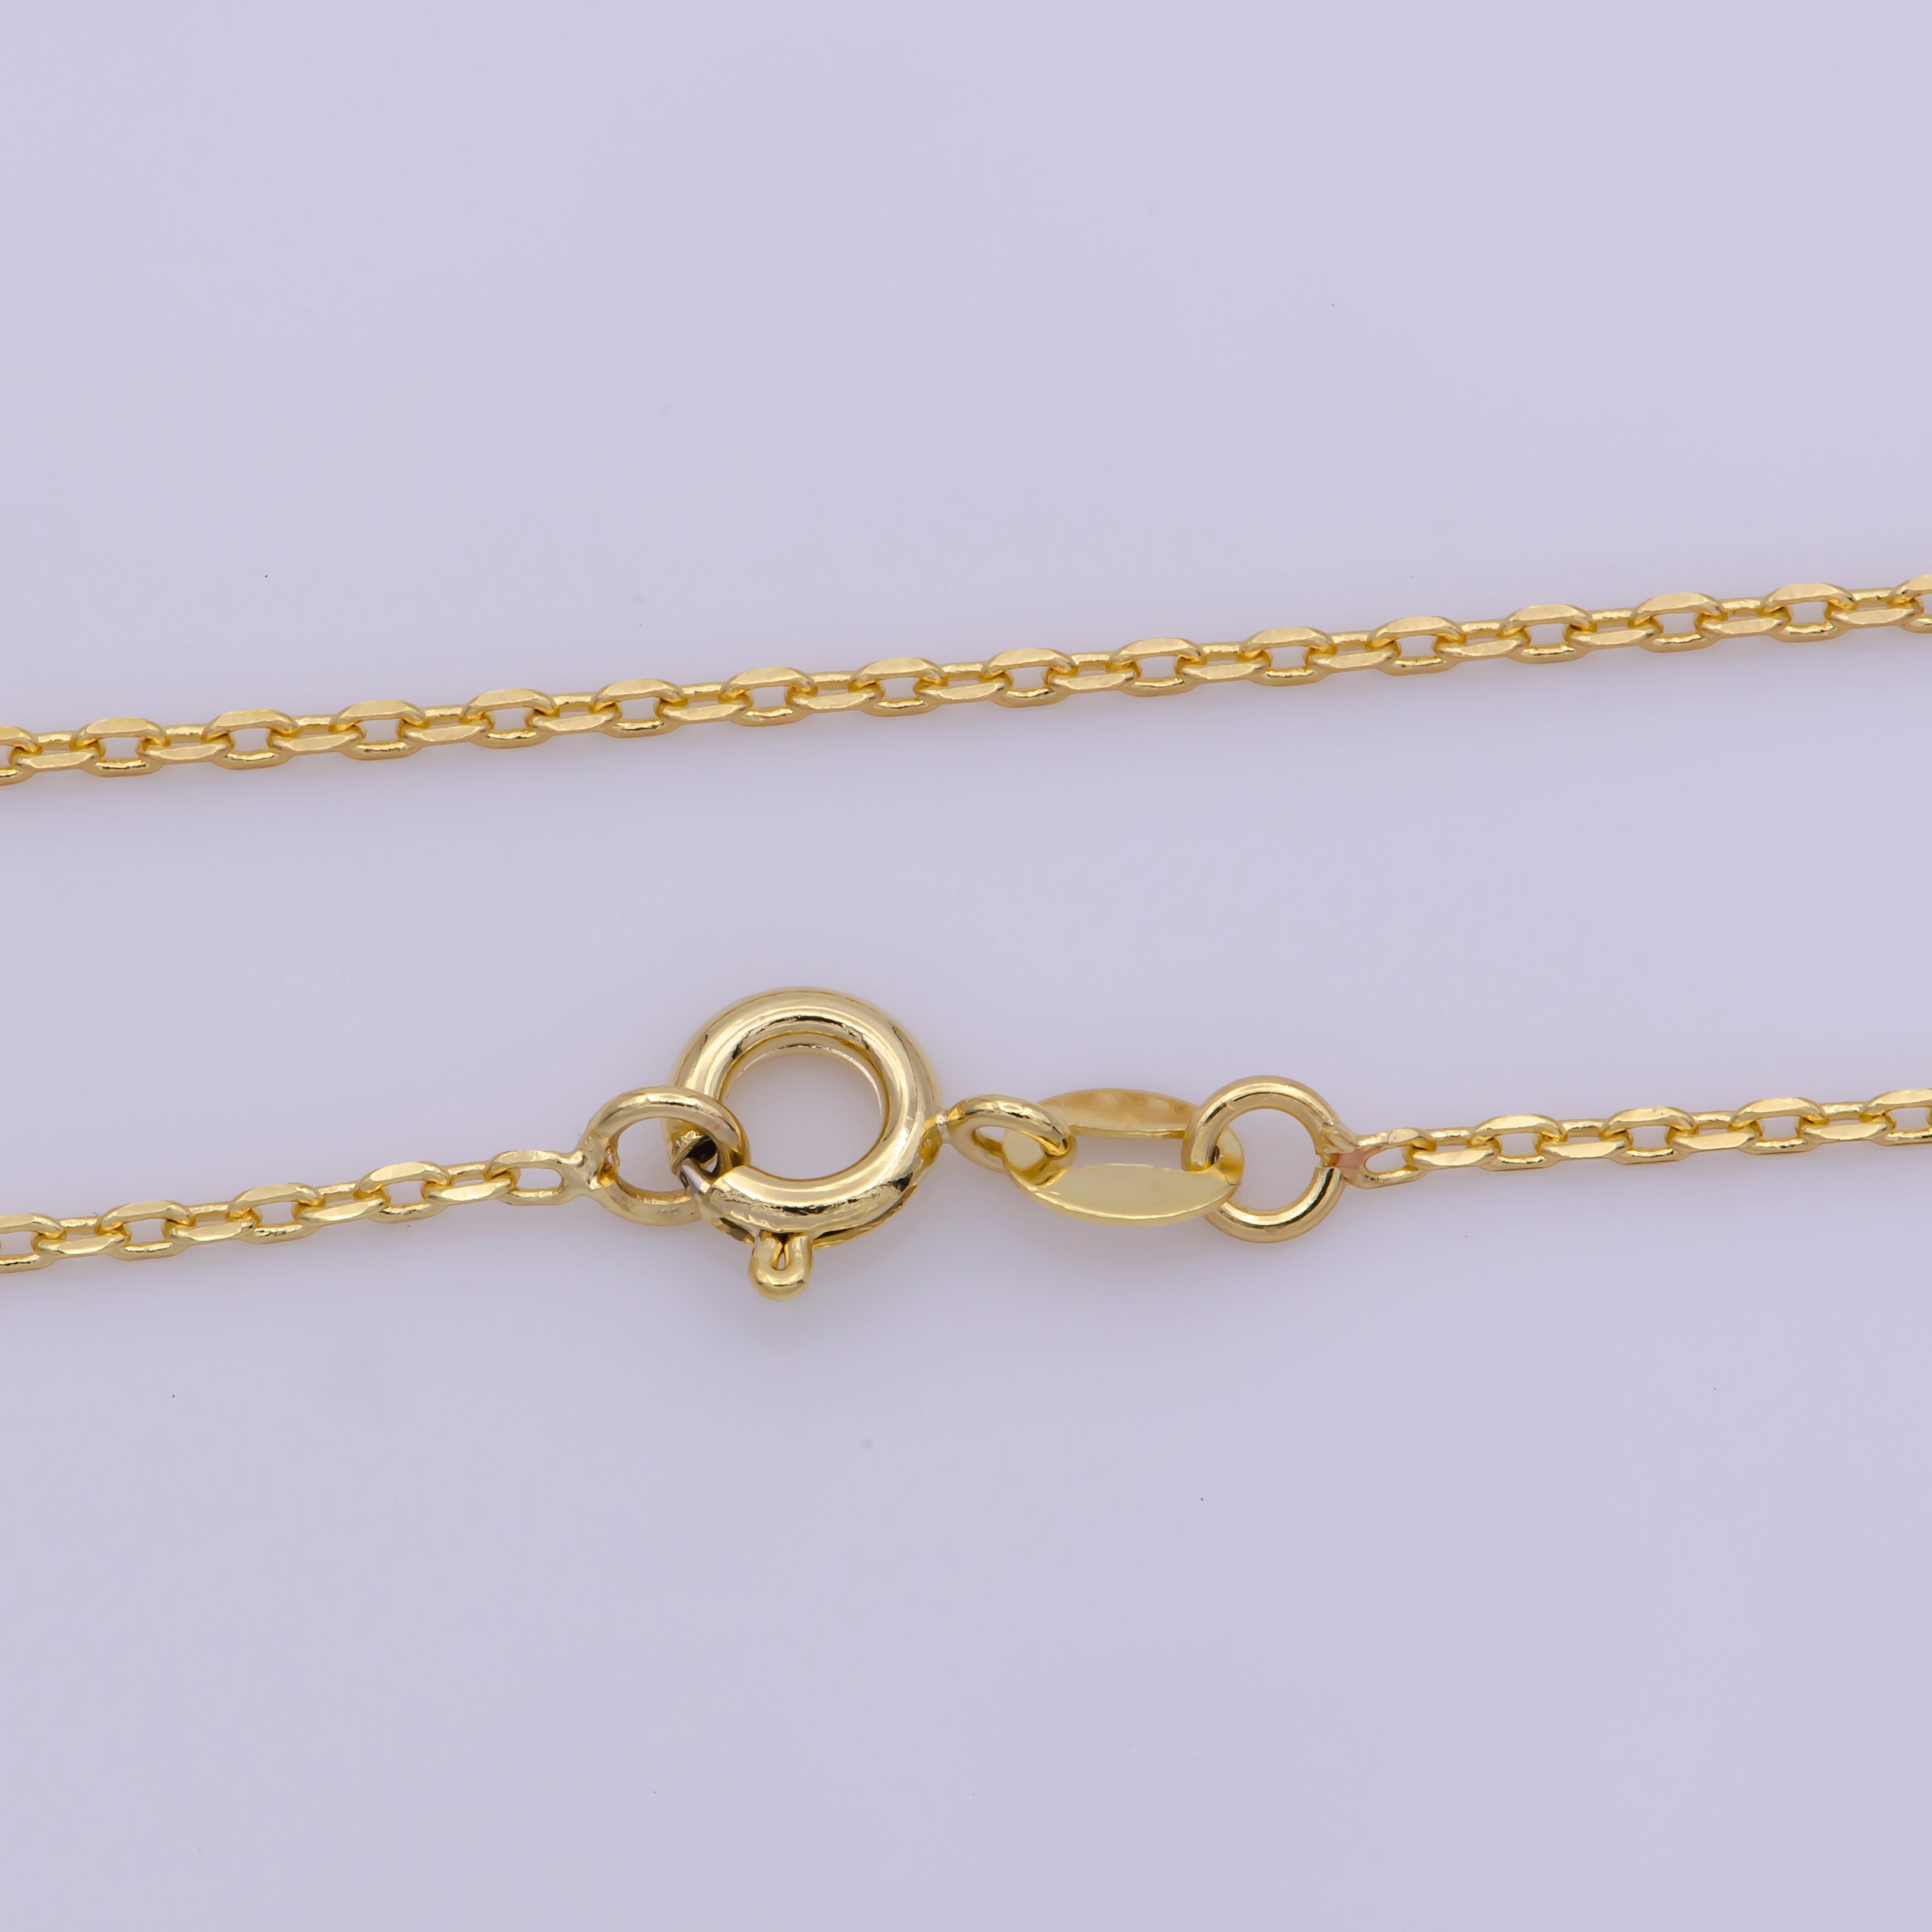 Dainty Gold Chain Necklace Cable Link Chain 18 inch long Ready to Wear Necklace - DLUXCA